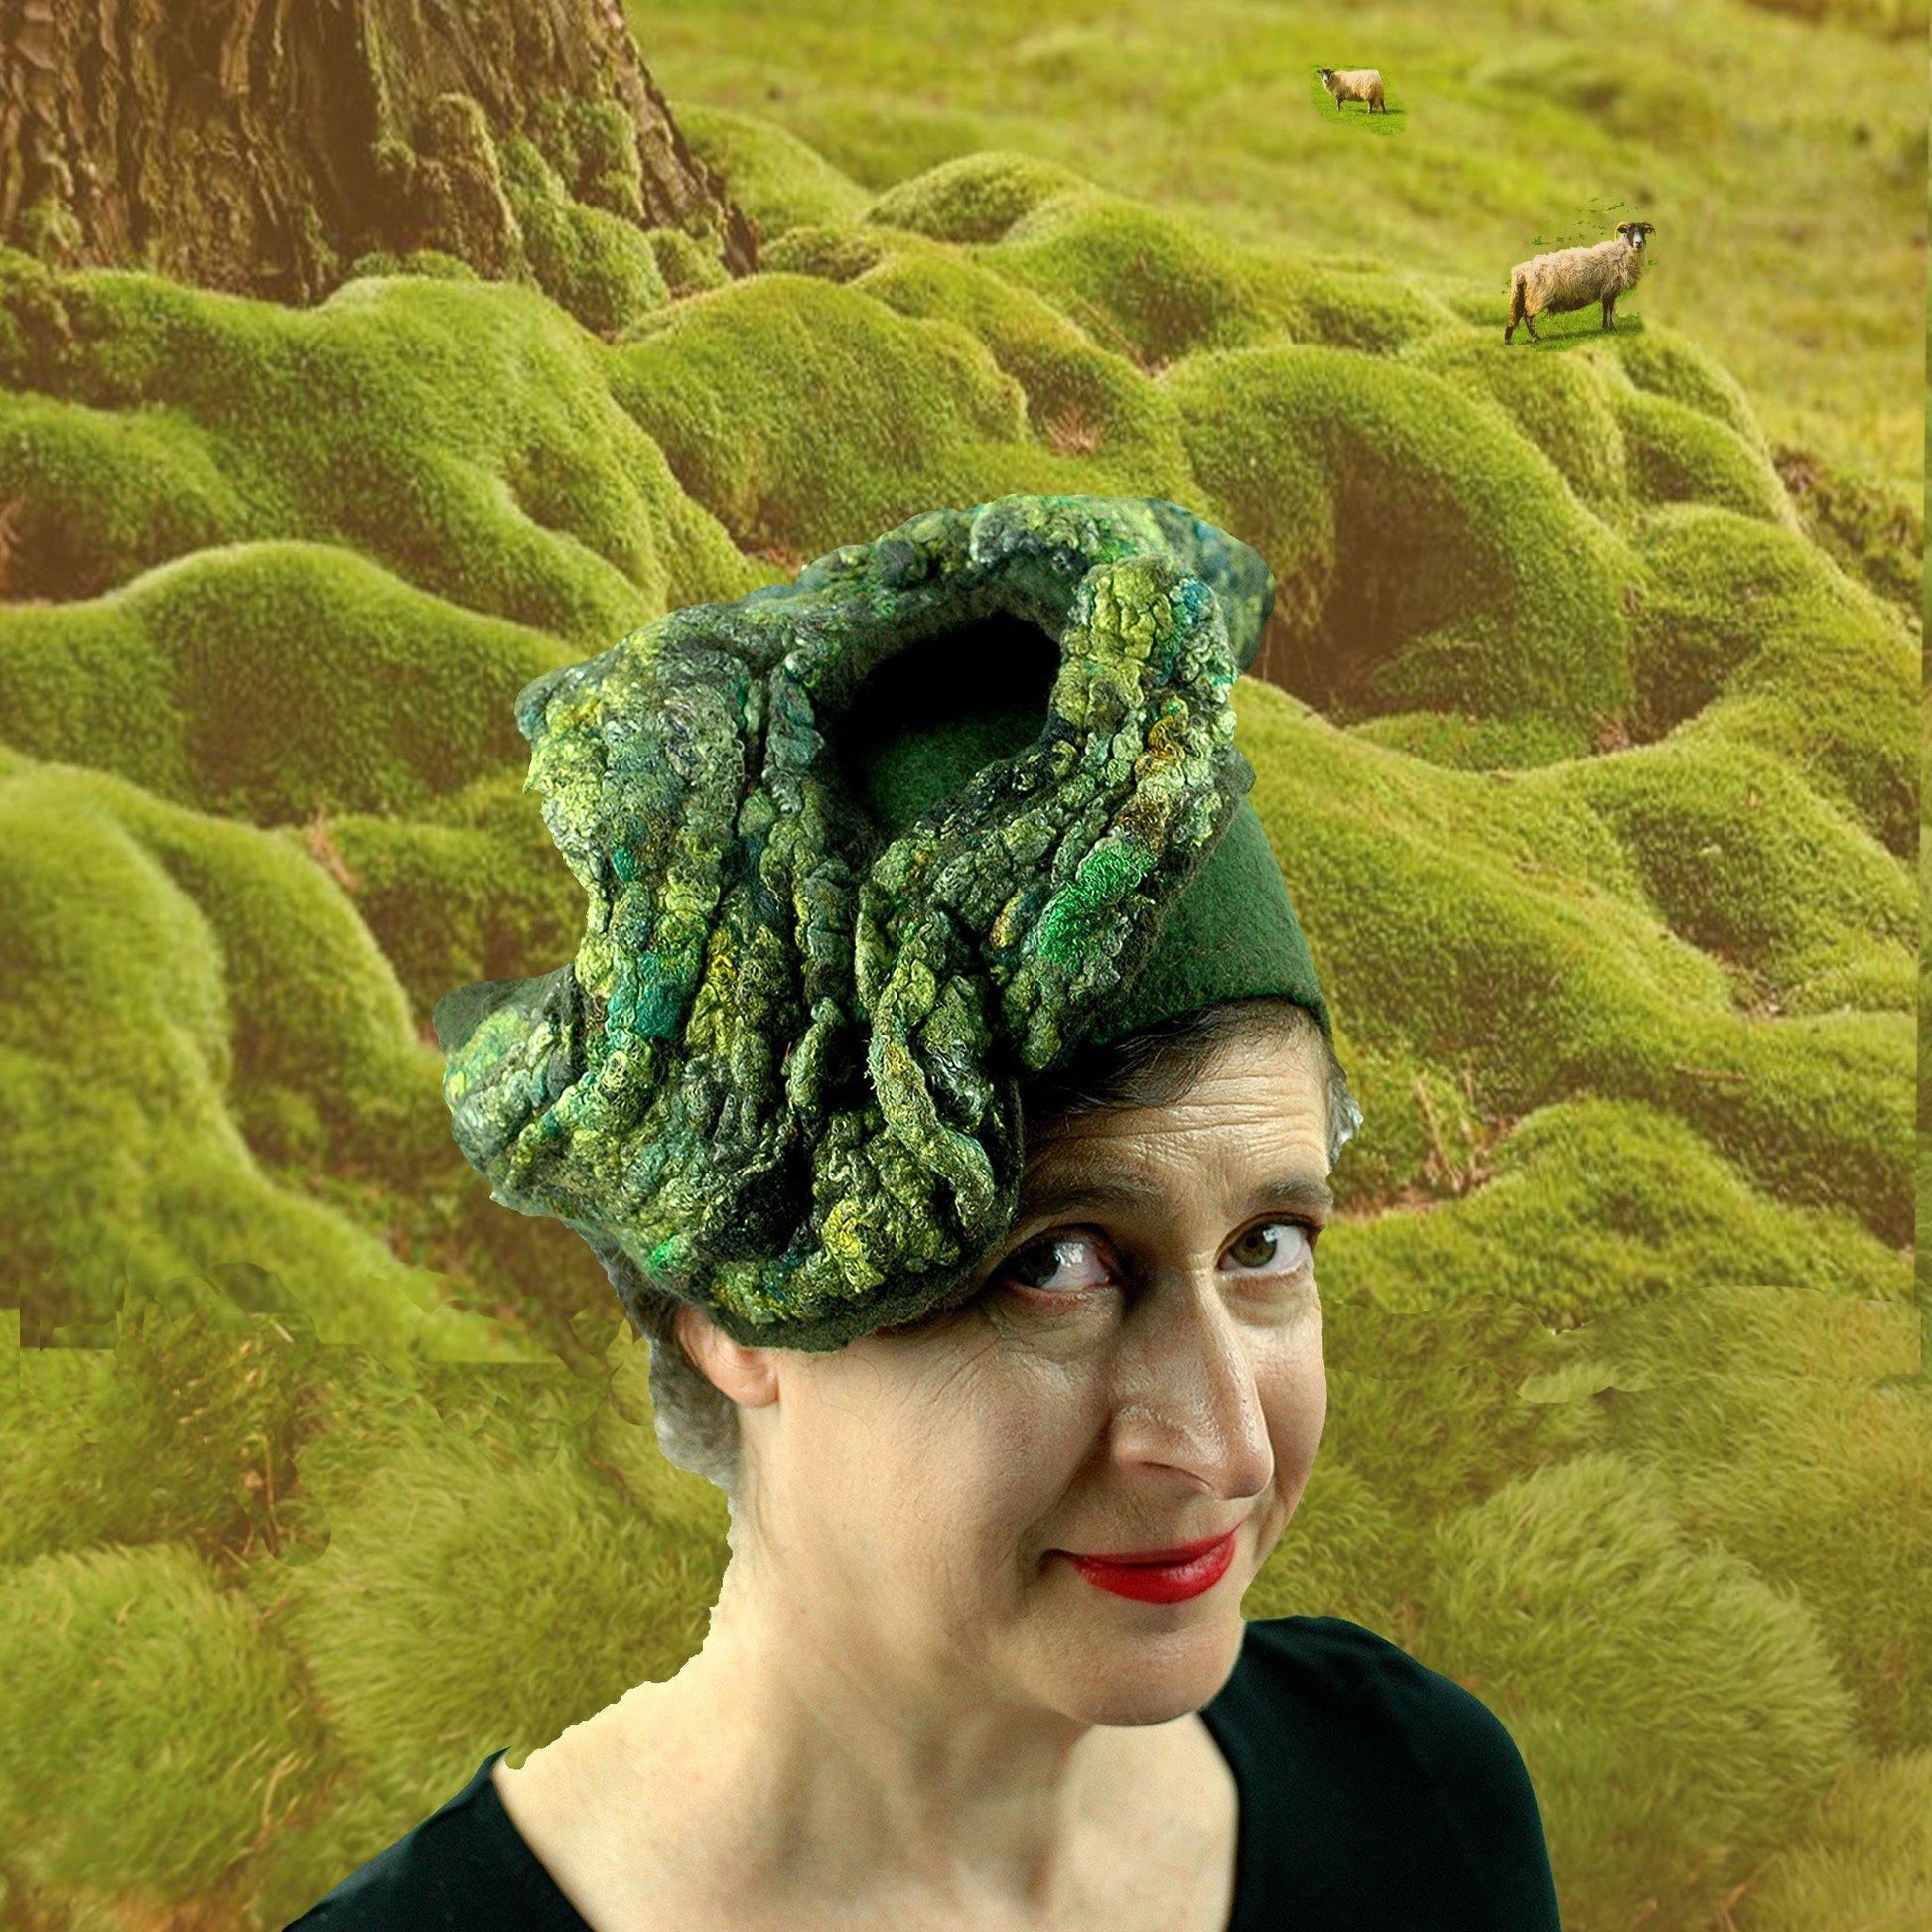 Green Pillbox felted hat against a collaged bed of soft green moss.